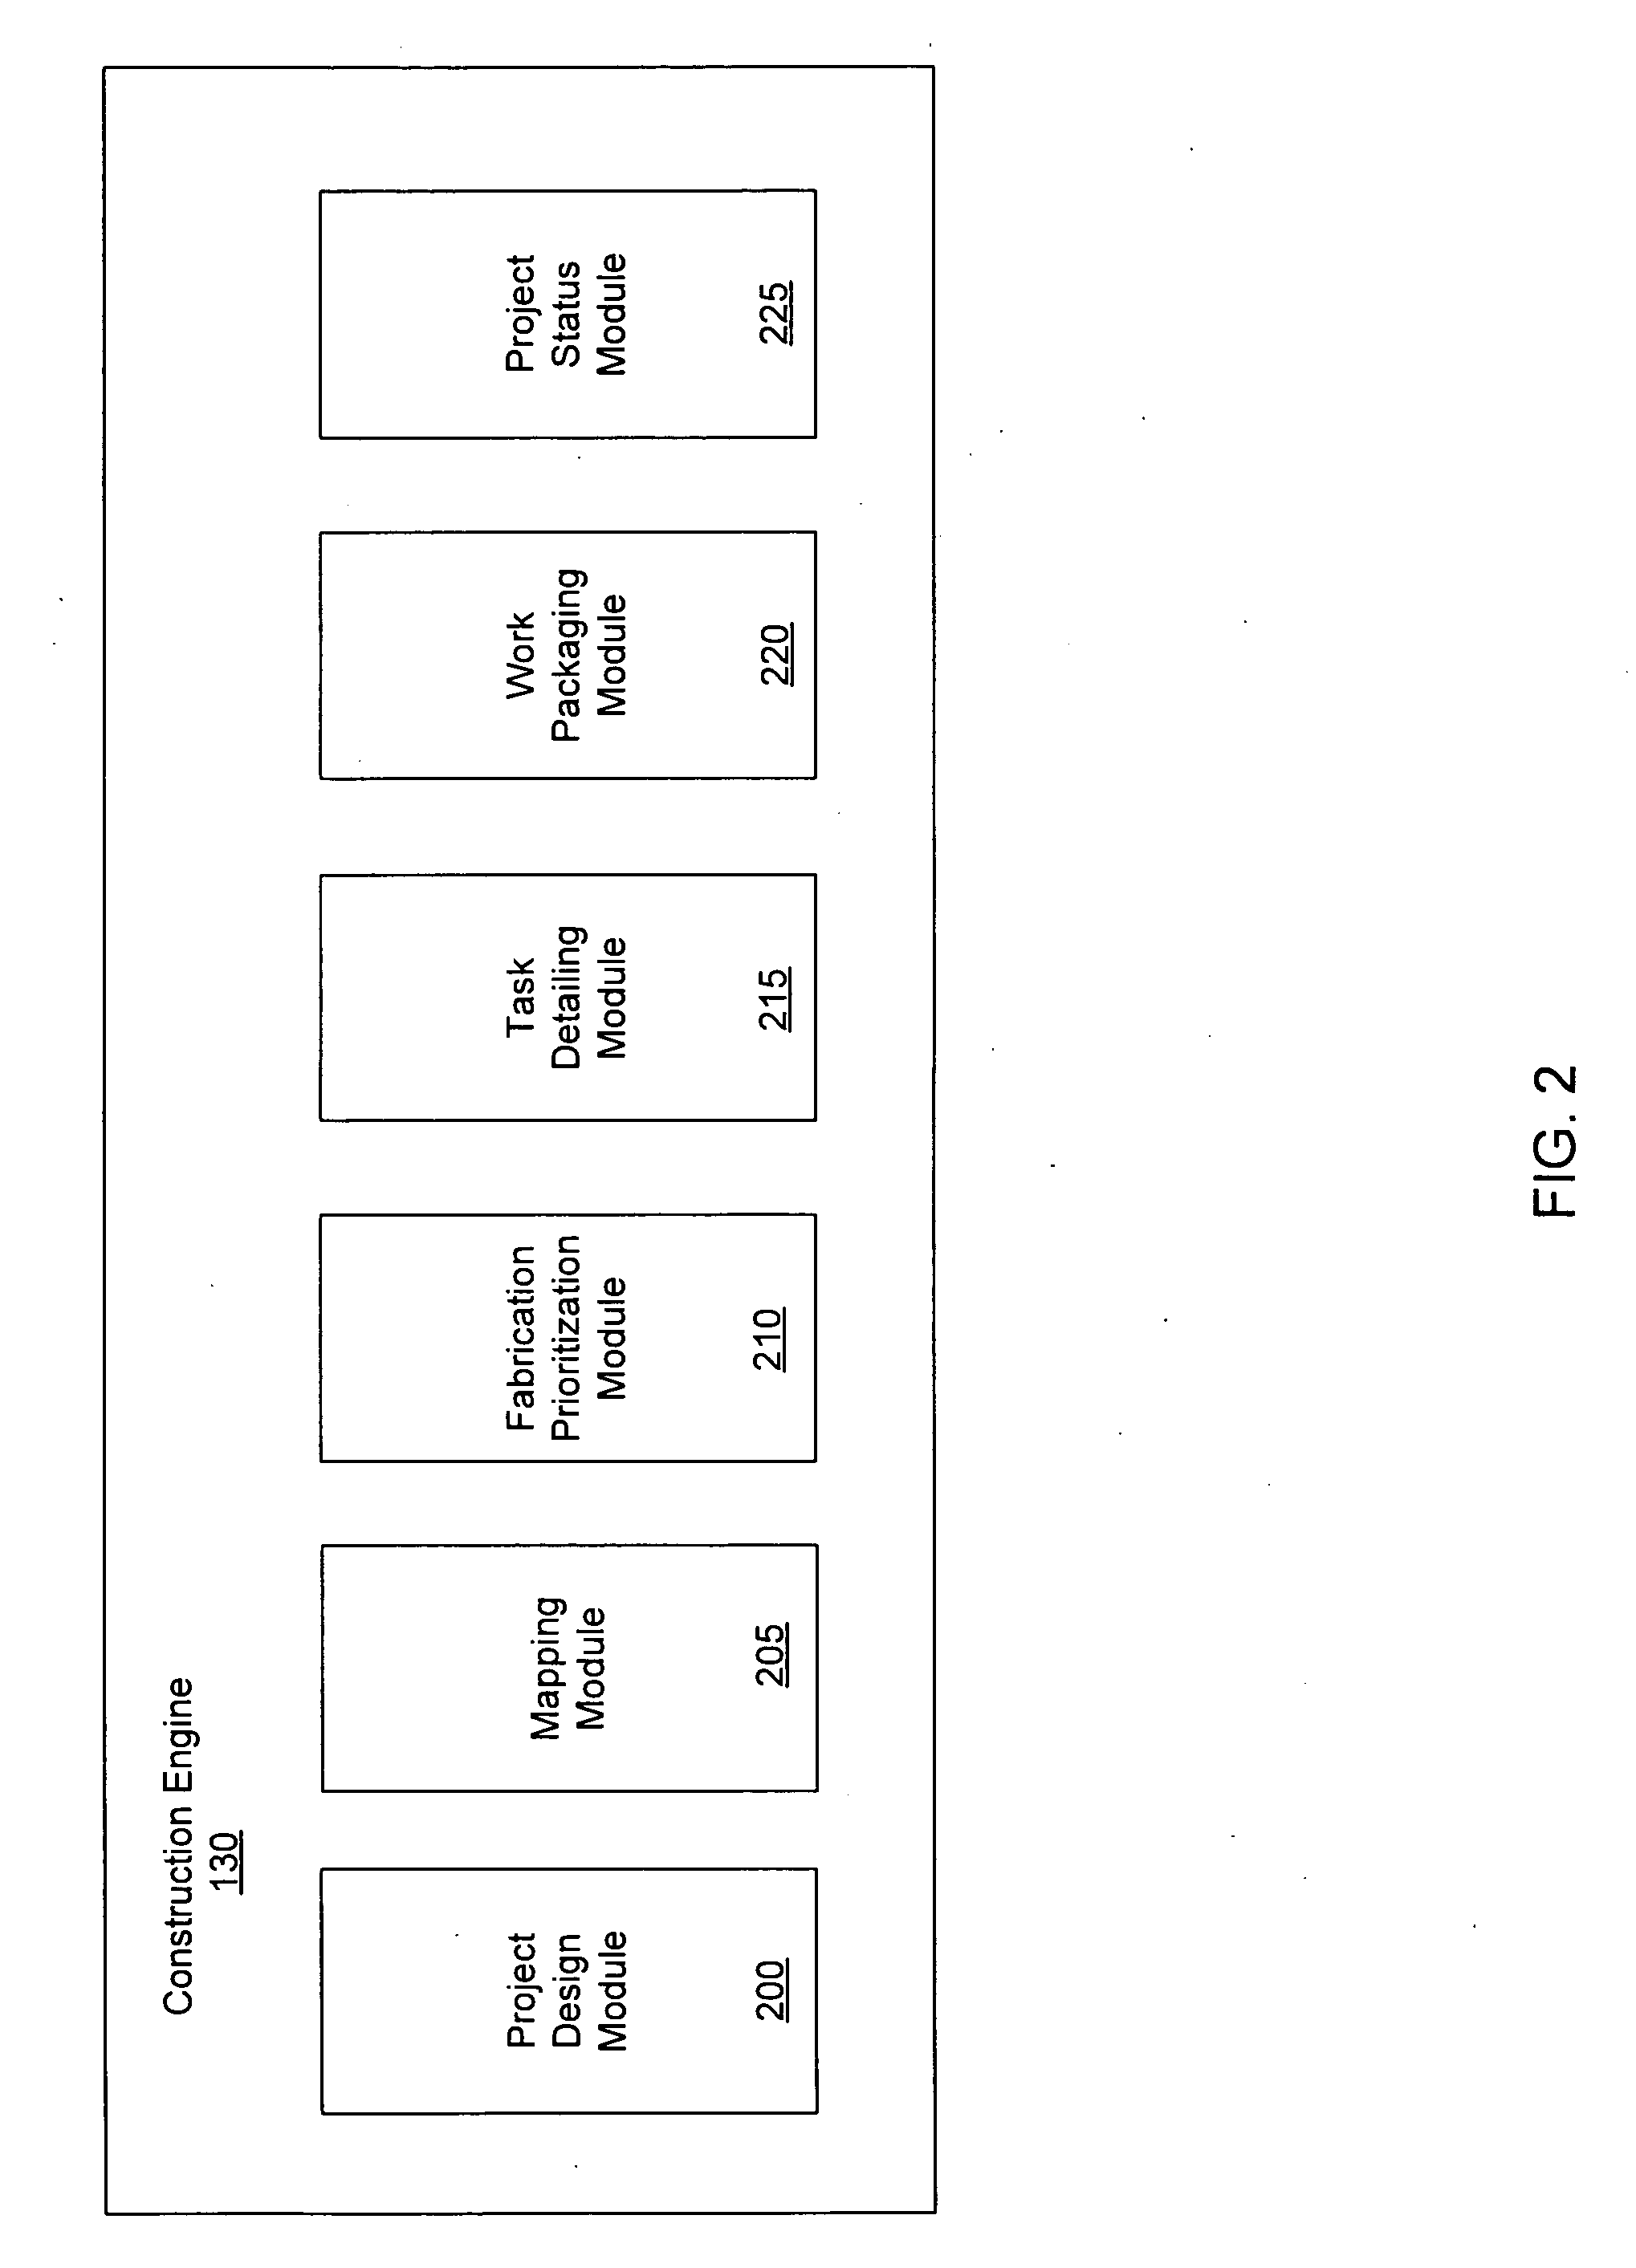 Construction project management system and method